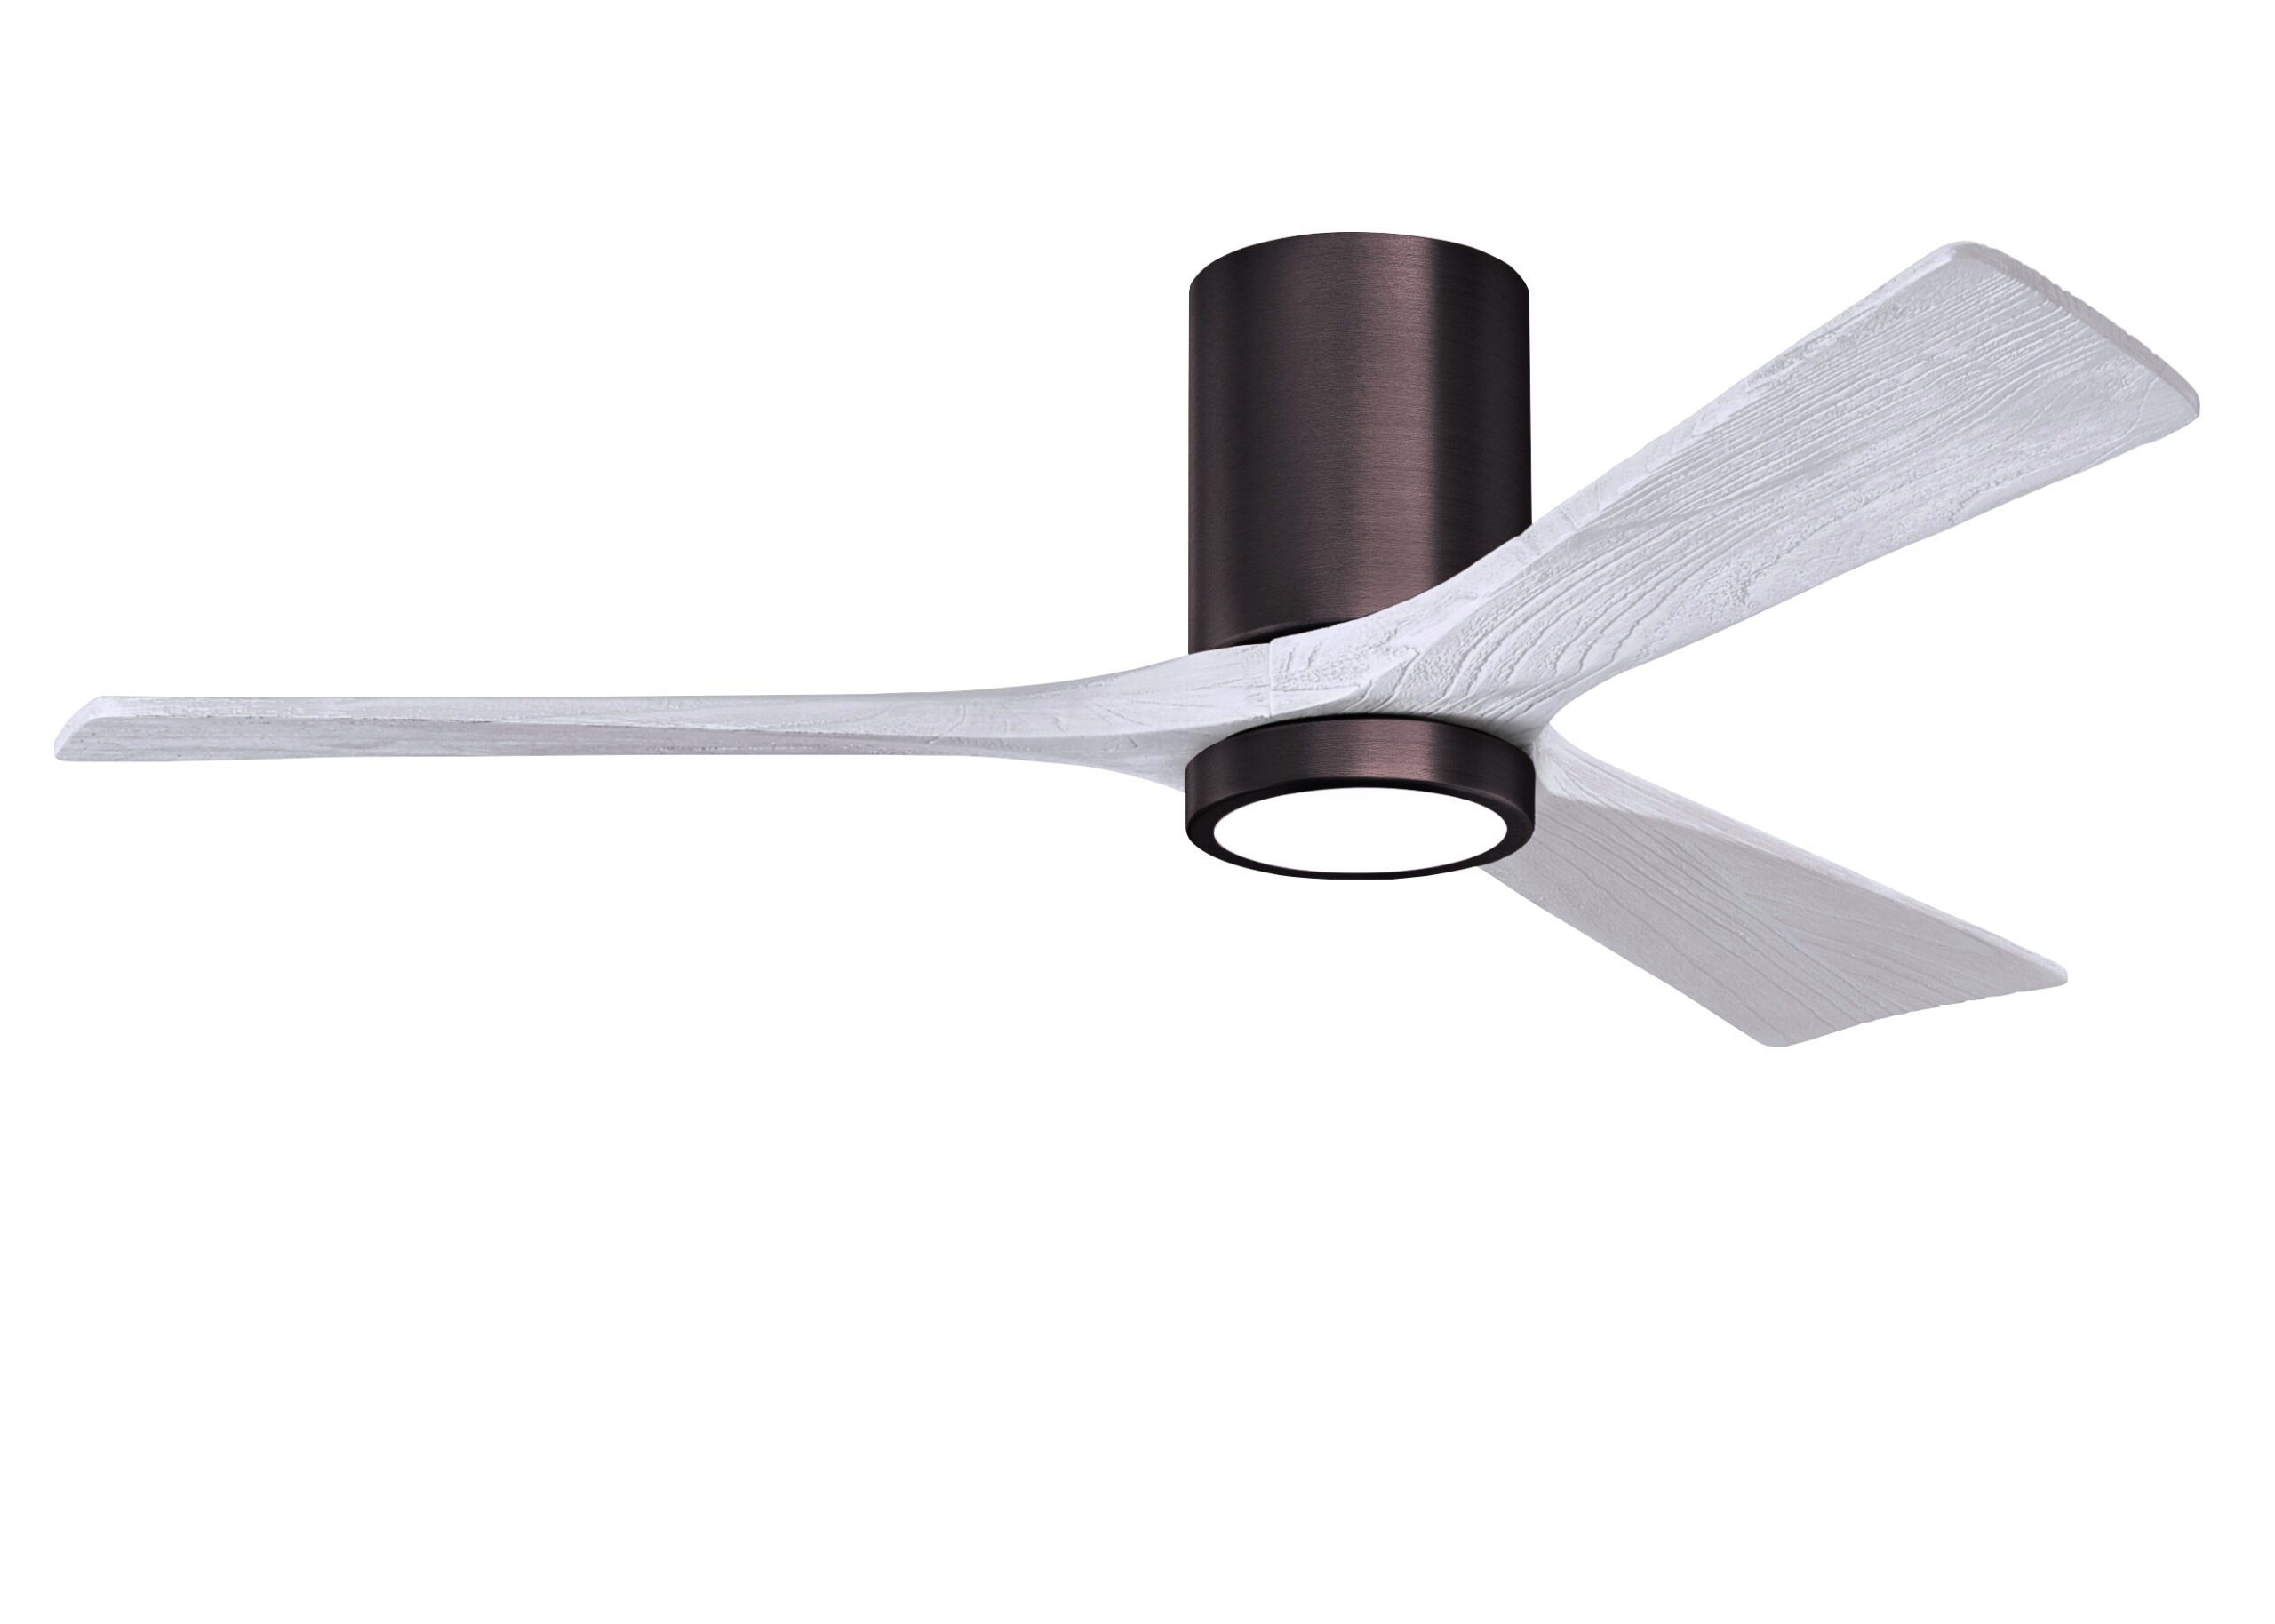 Irene-3HLK Ceiling Fan in Brushed Bronze Finish with 52